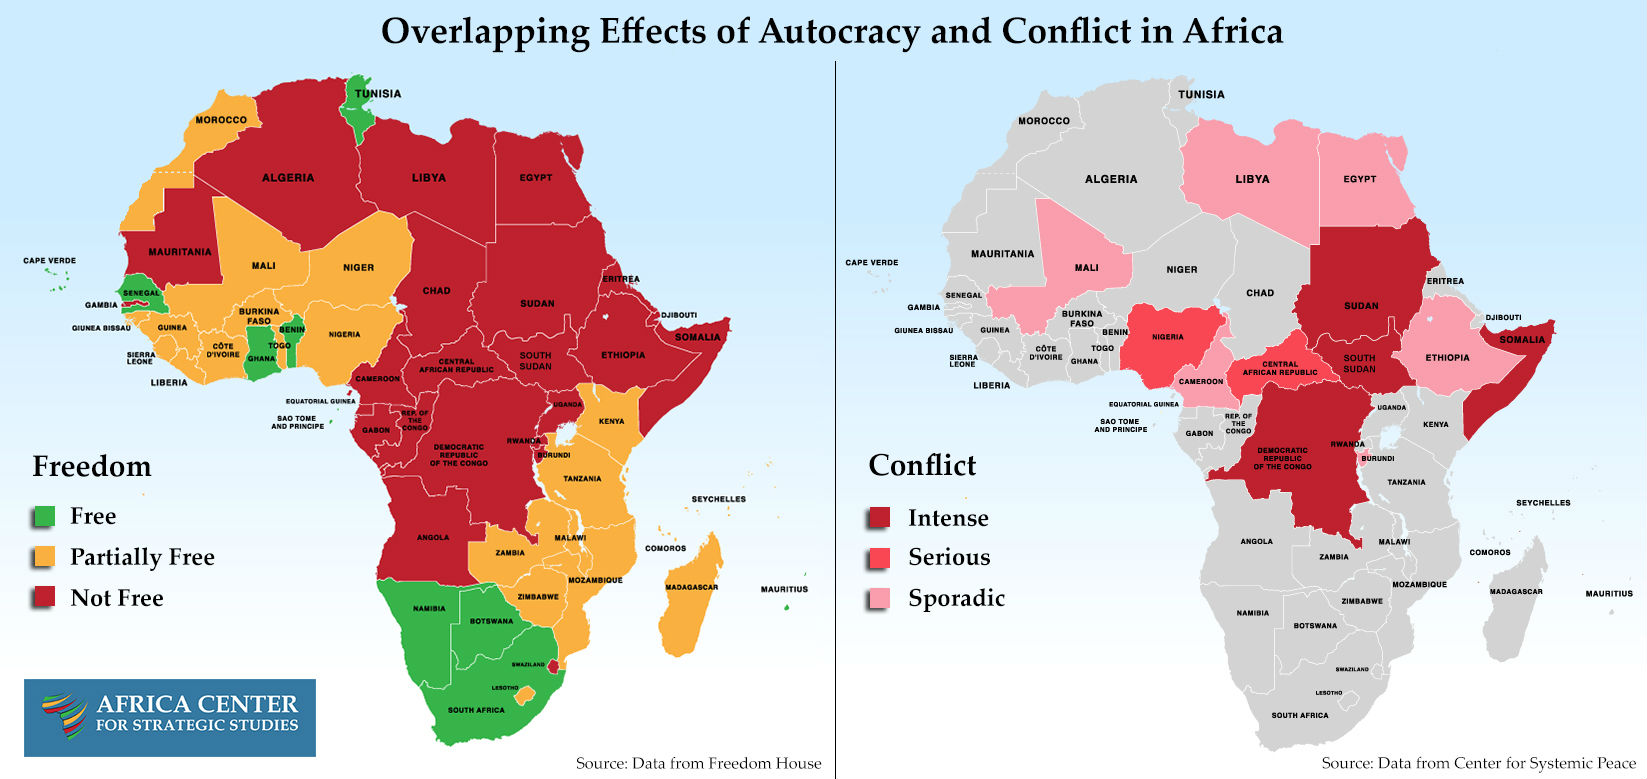 Overlapping Effects of Autocracy and Conflict in Africa